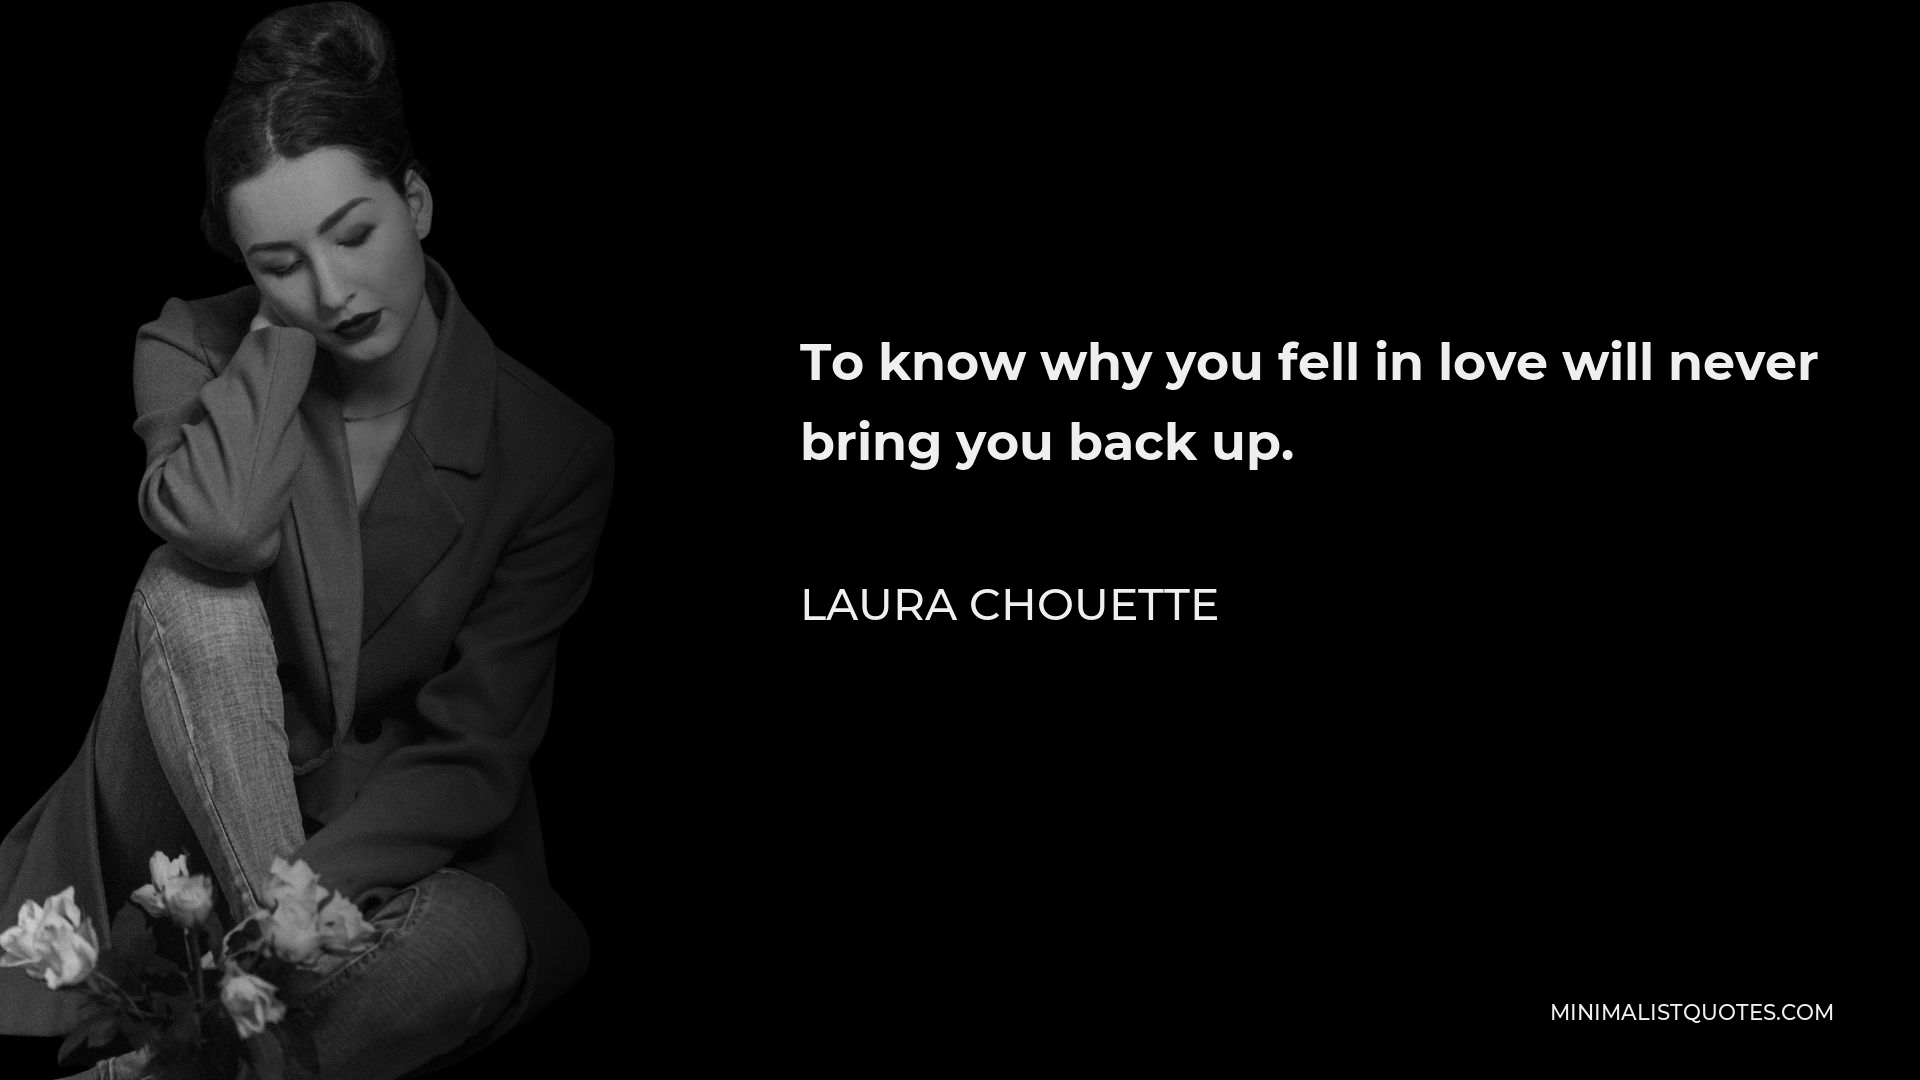 Laura Chouette Quote - To know why you fell in love will never bring you back up.